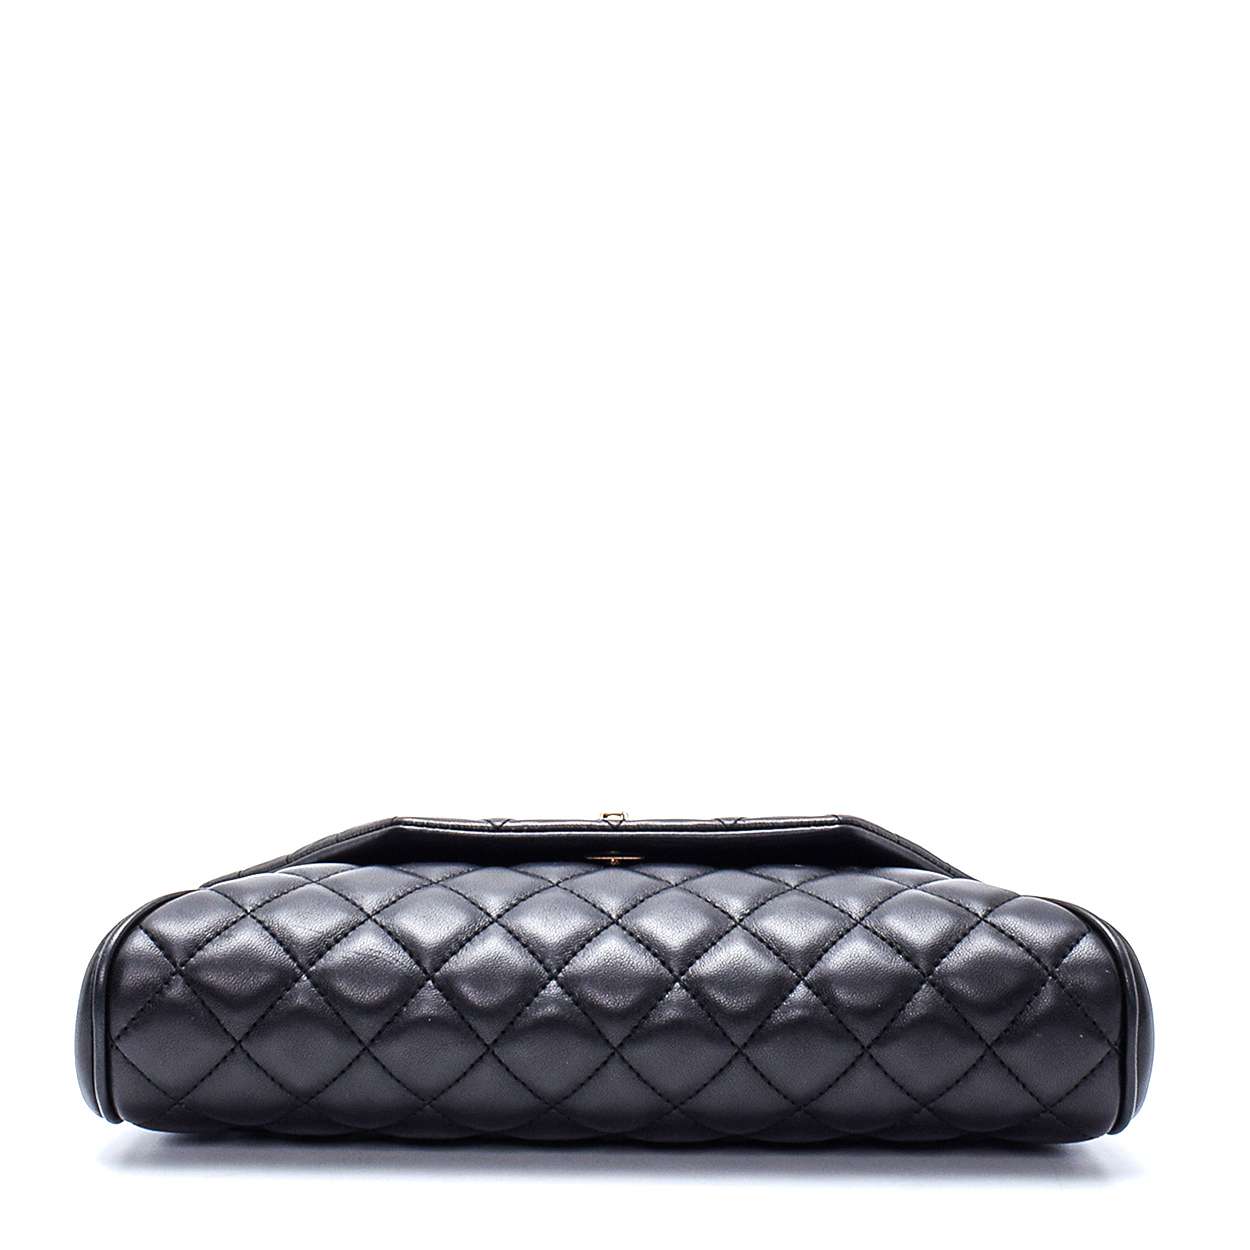 Chanel - Black Lambskin Leather Quilted Fold Up Again Clutch